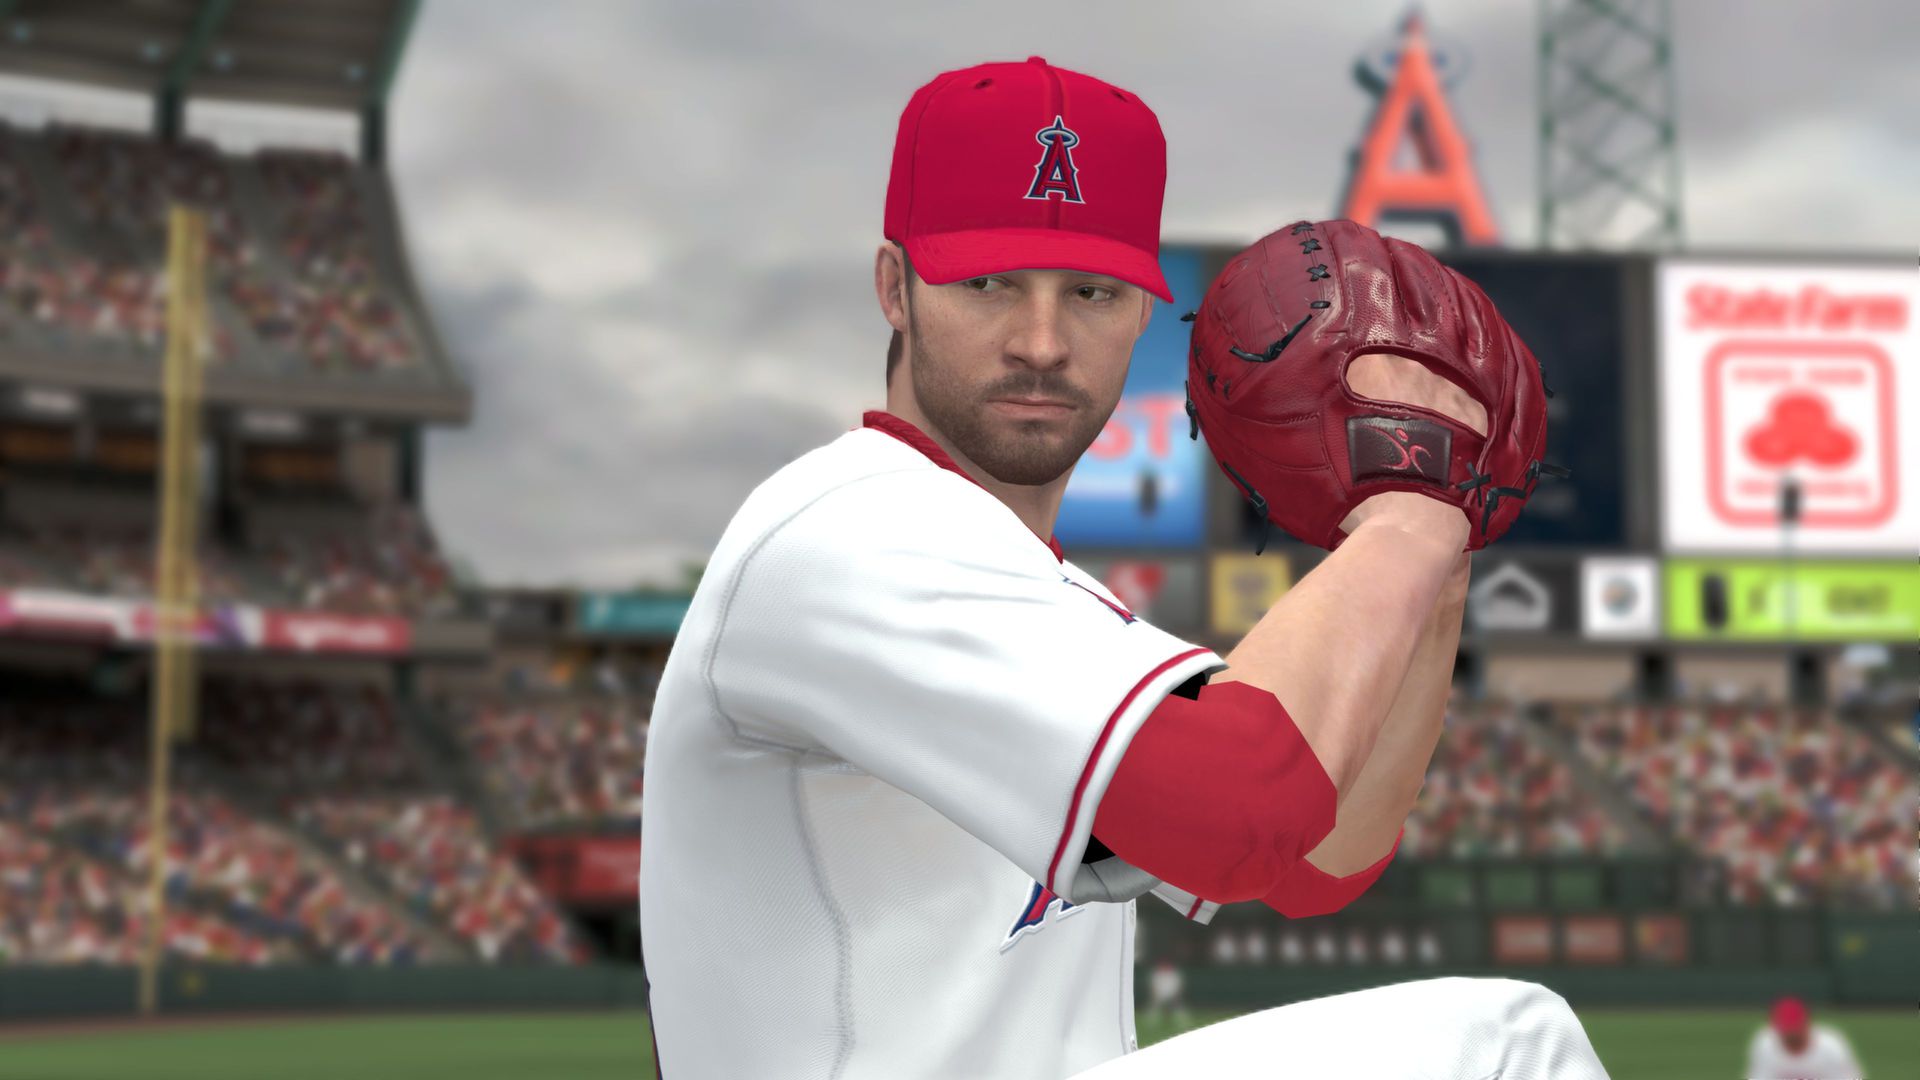 GameSpy Make MLB 2K12 PitchPerfect With 5 Great Mods  Page 1